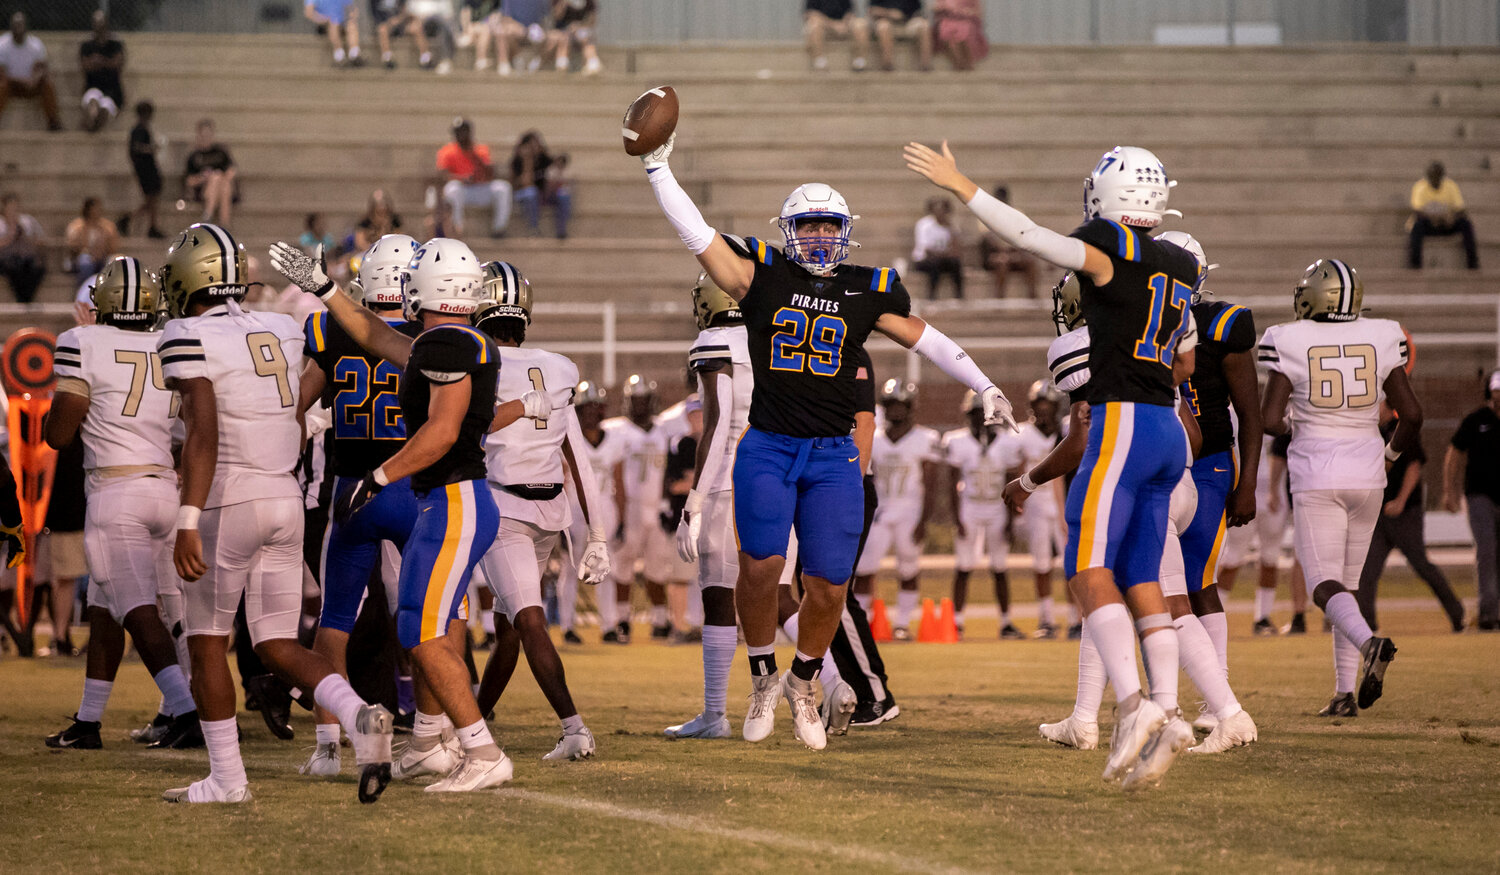 Rock Gearheart (29), Dixon Davis (17), Dallas Boothe (2) and the Fairhope defense celebrate a first-quarter fumble recovery during the Pirates’ region battle with Davidson Friday night at home. The Warriors went on to record a 42-10 win to move to 2-2 in the standings.